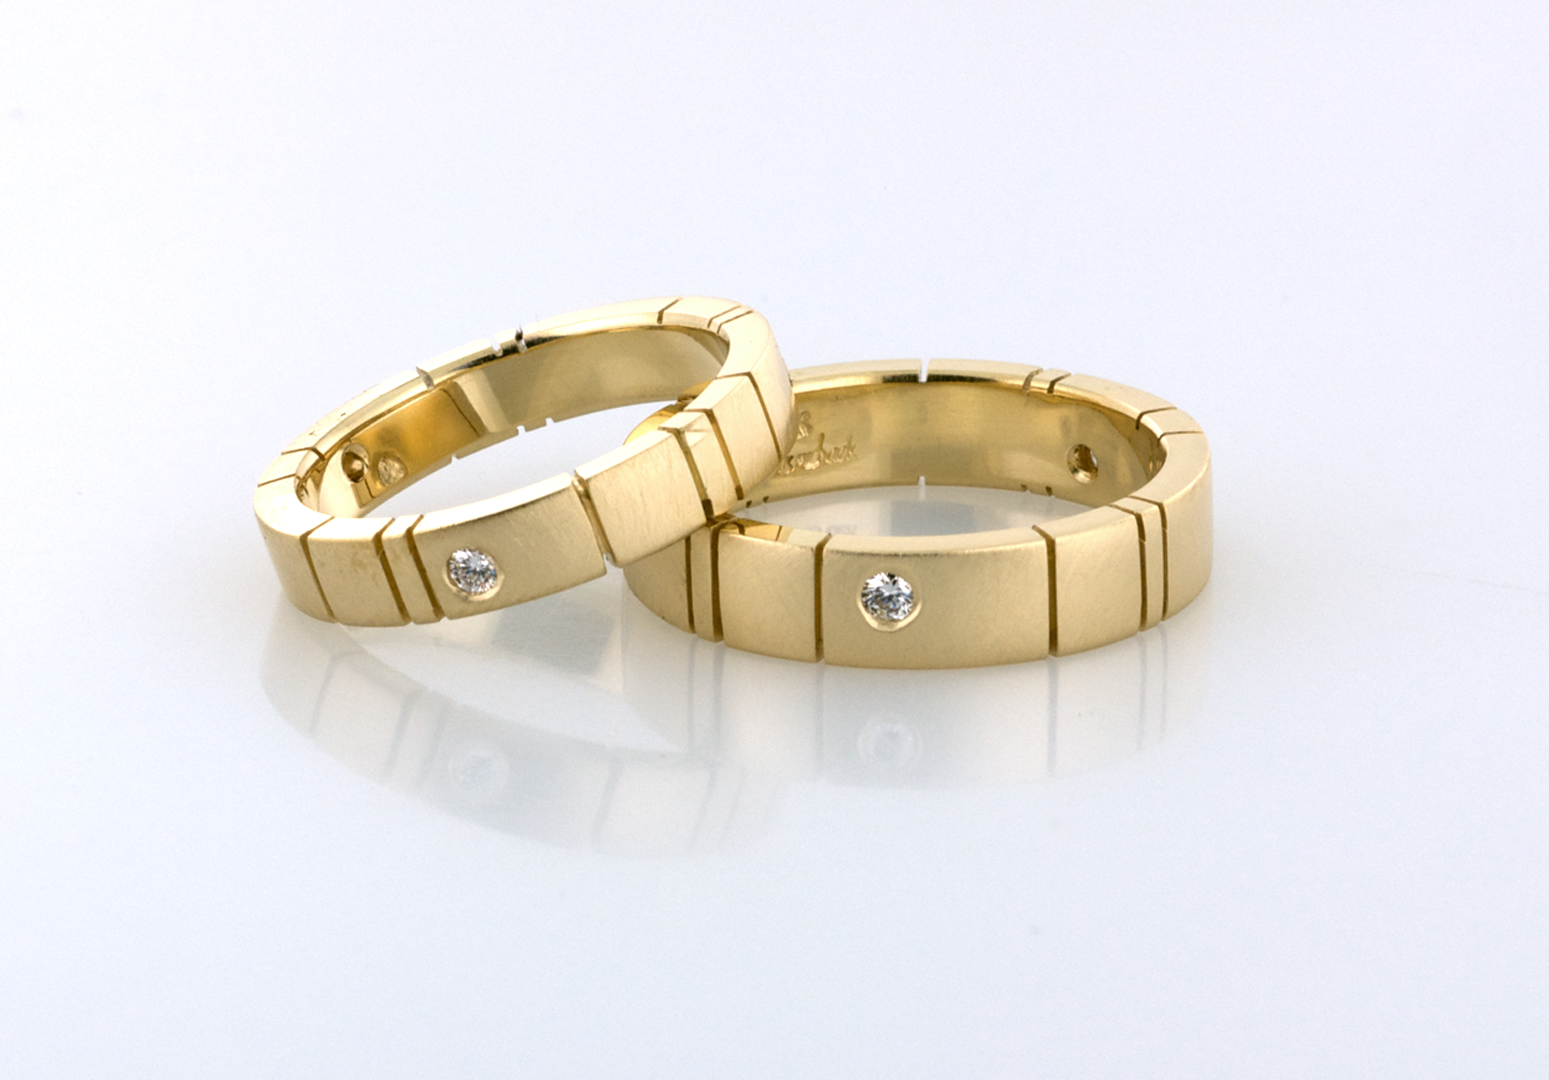 gold wedding bands set with diamonds Copyrighted Original by Thomas Michaels 